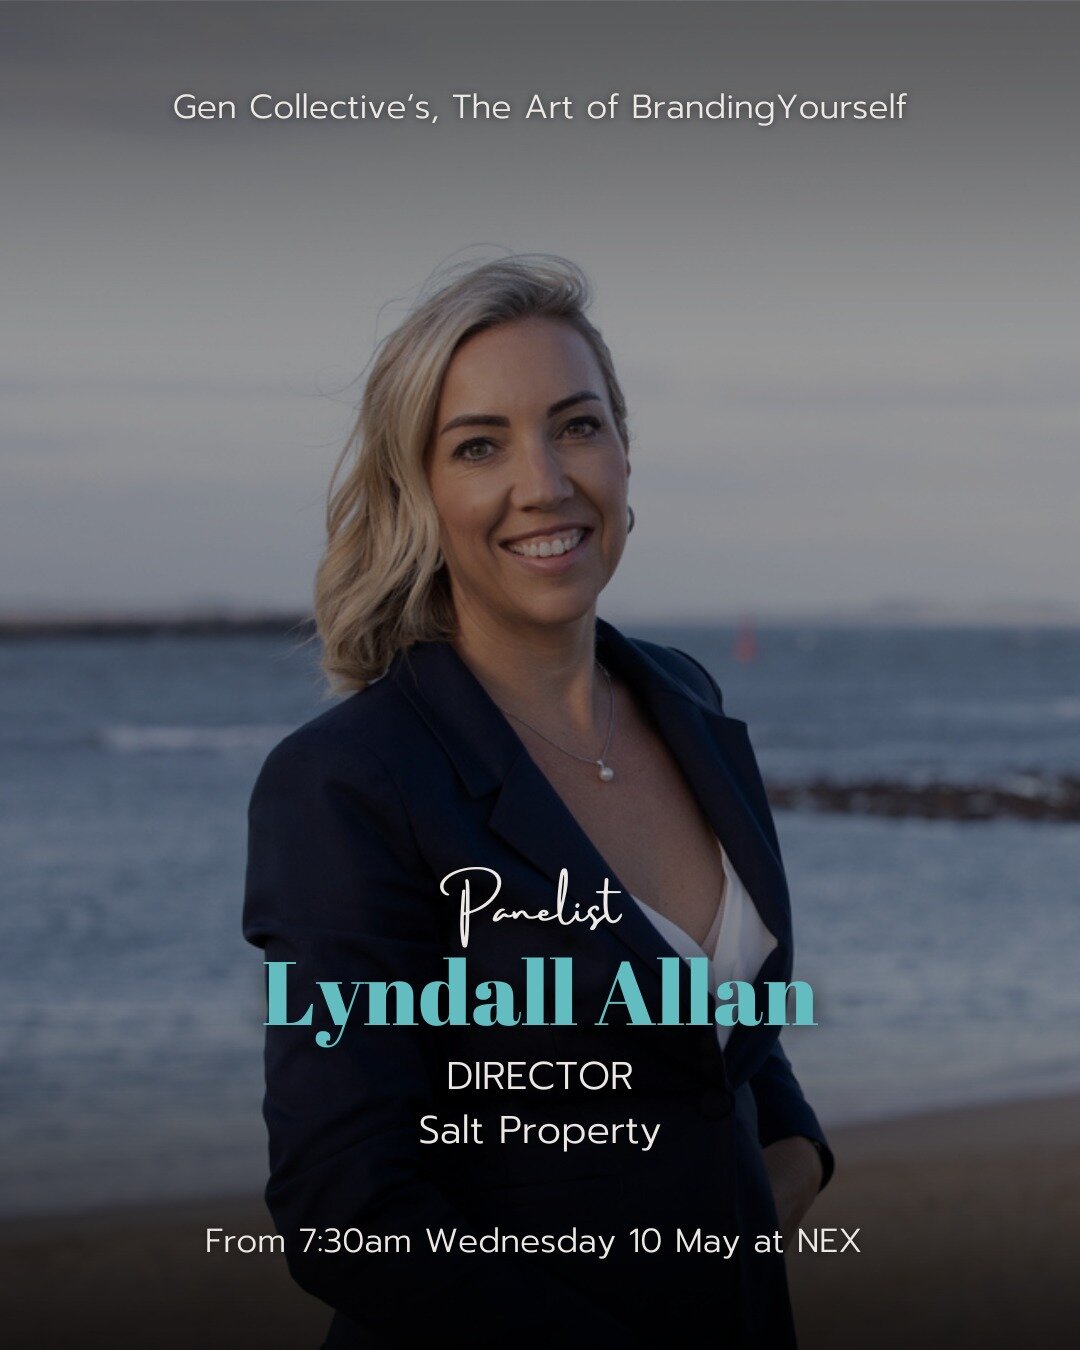 We would like to introduce you to one of our panelists... @lyndallallan_saltproperty 🎉

Lyndall knows a thing or two about personal branding, which is why she's the perfect choice to share her wisdom with you at our upcoming event.

After leaving a 